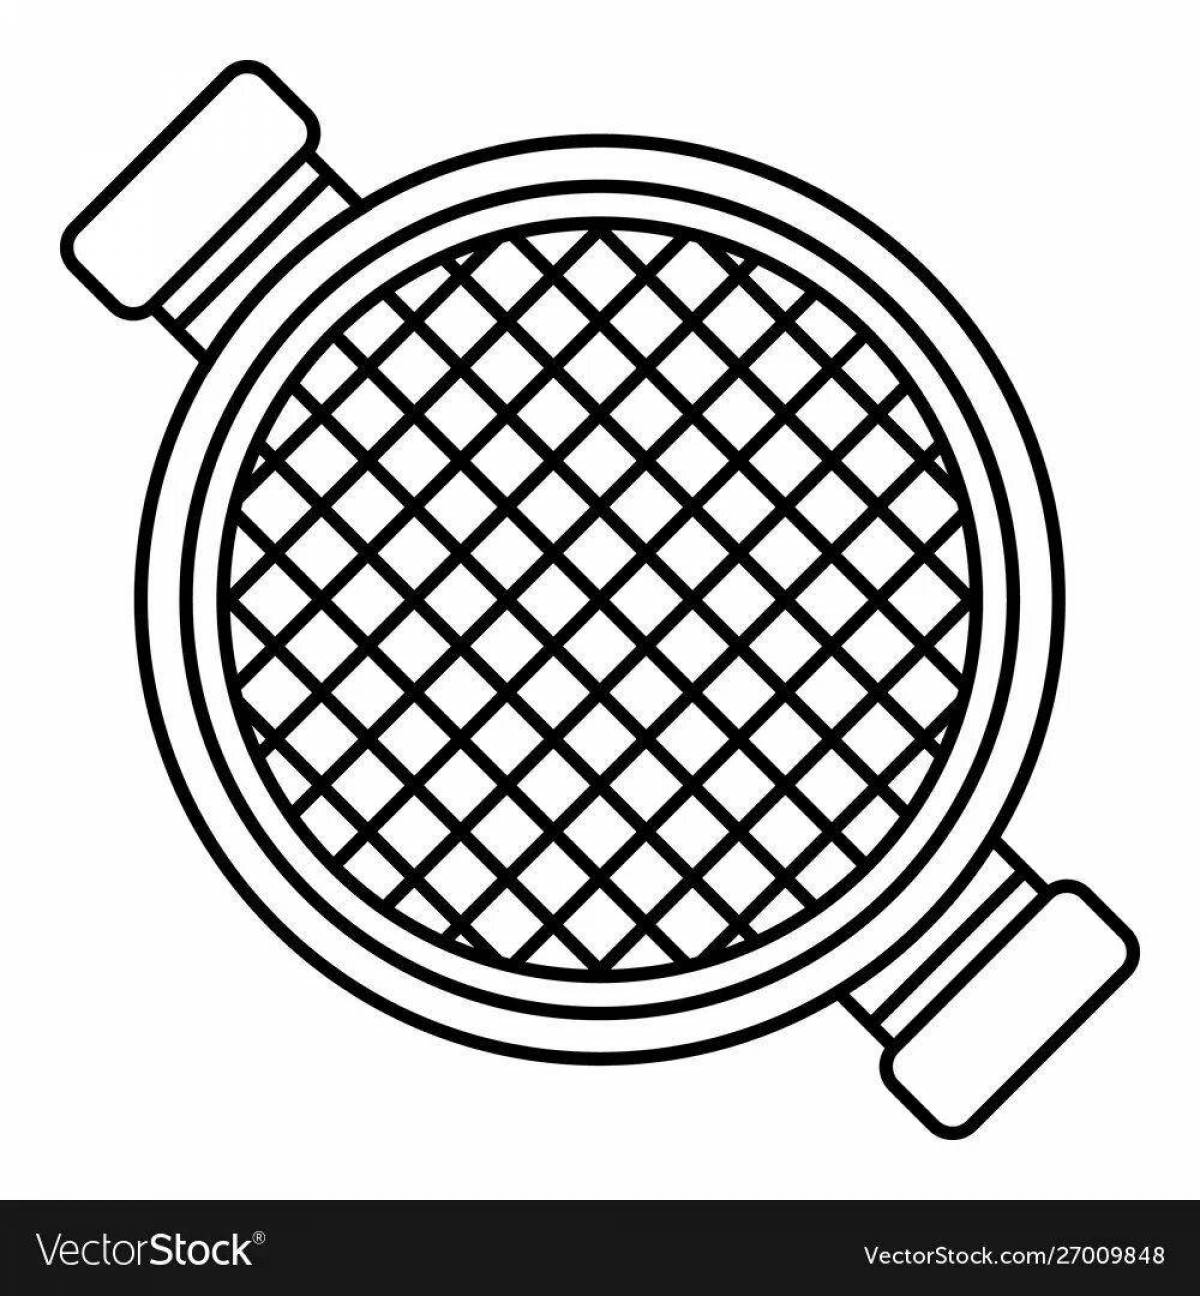 Shiny sieve coloring page